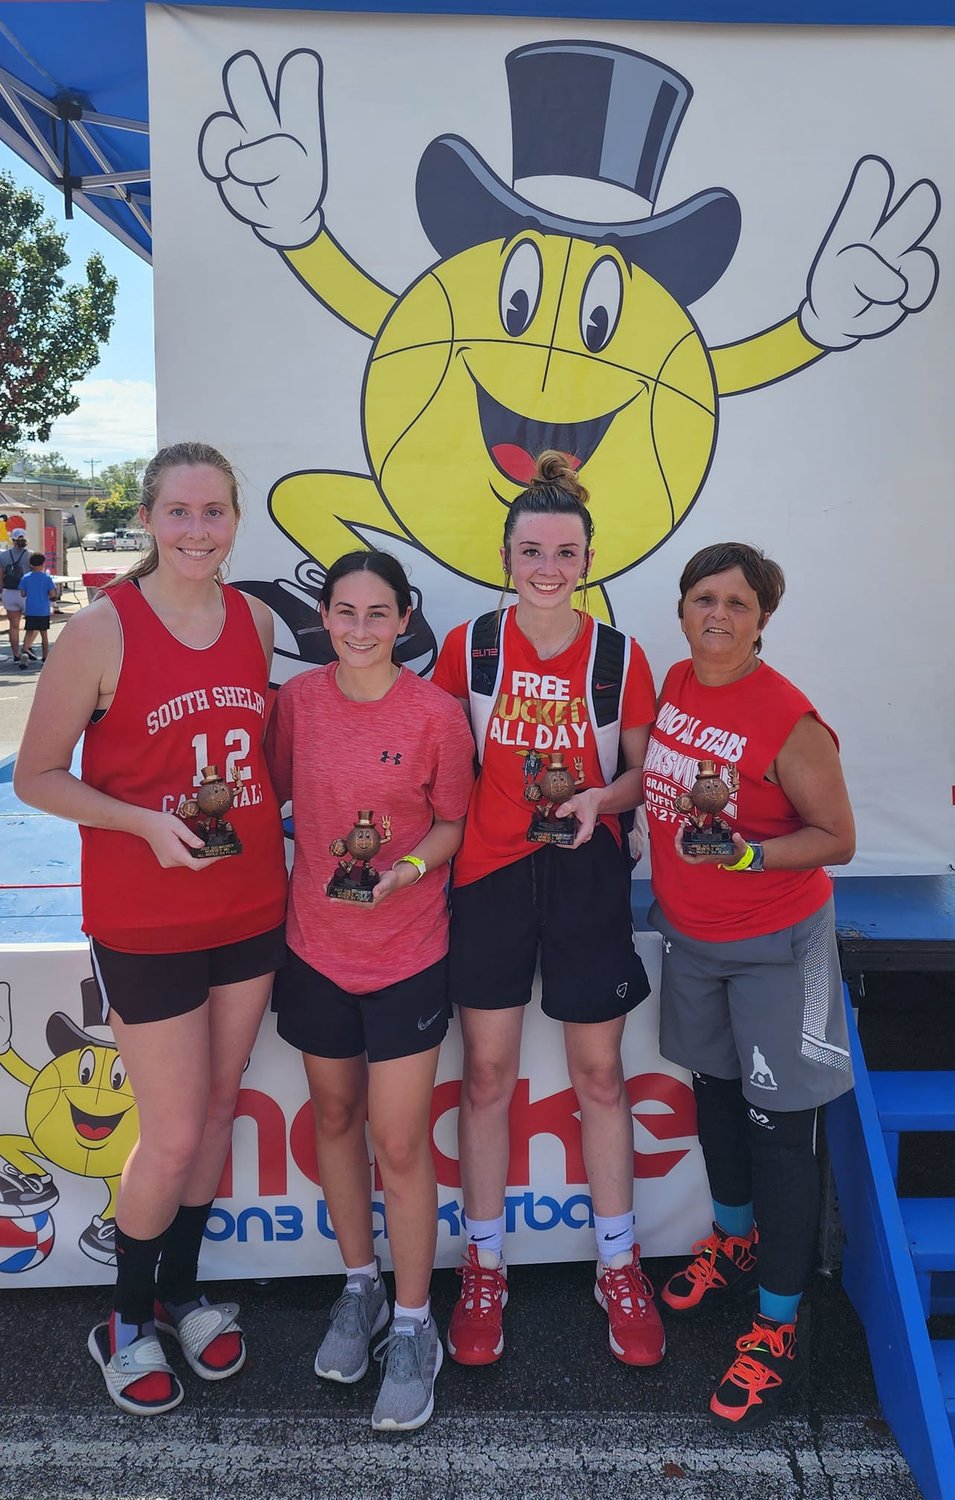 The team of Cassidy Johnson, Caitlyn Poore, Presley Stoneburner and Barbara Morrow placed third in the women's division. The team had a mix of players from Shelbina, Shelbyville and Huntsville.